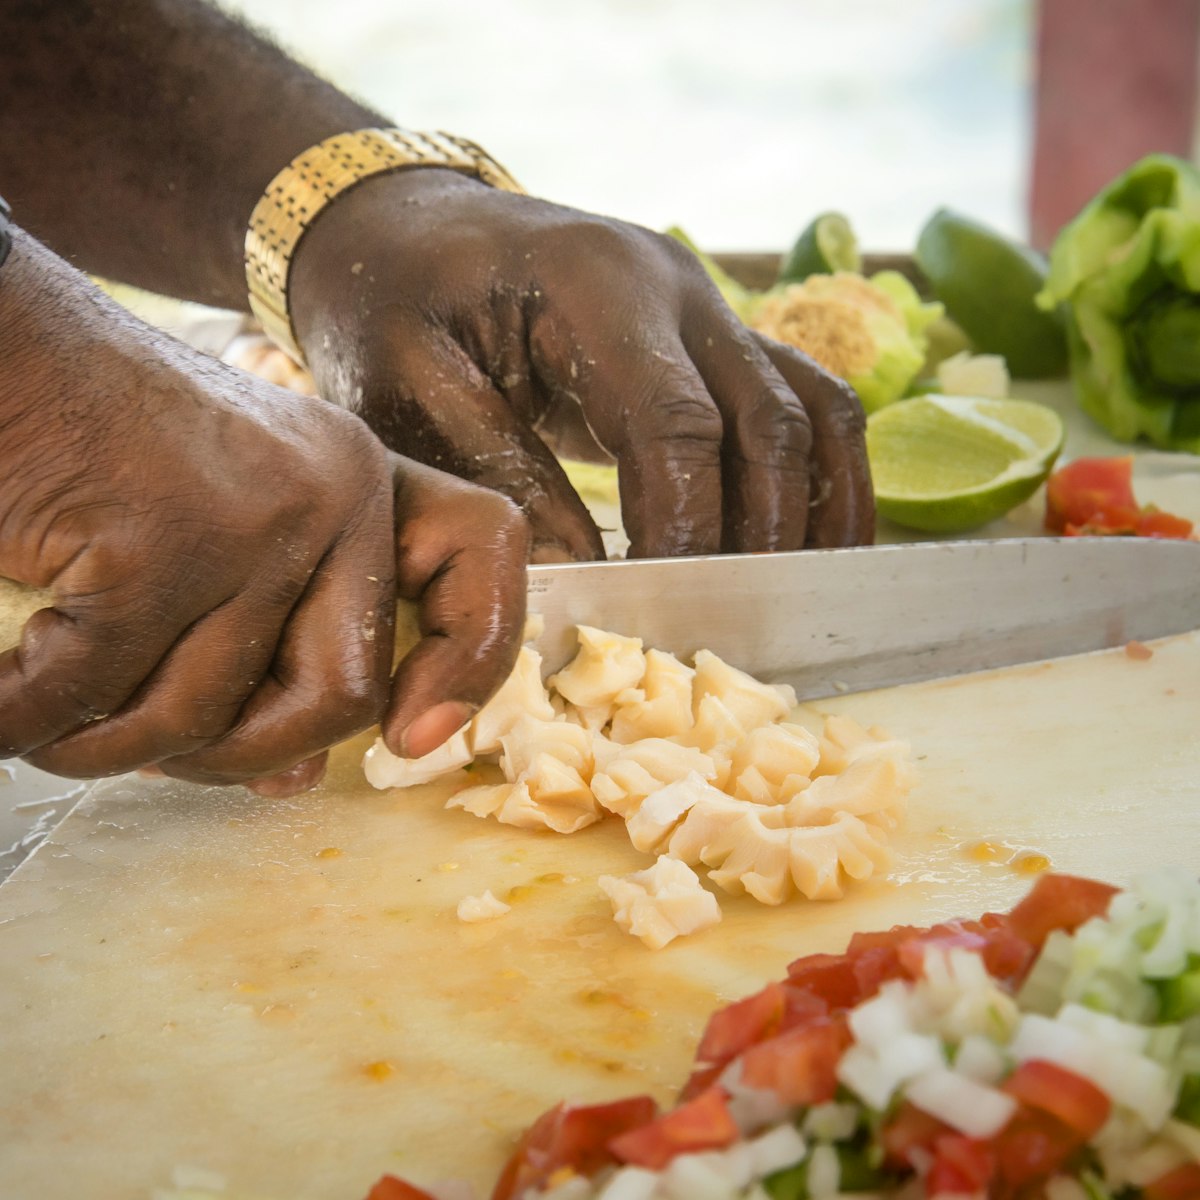 Making conch salad on the street